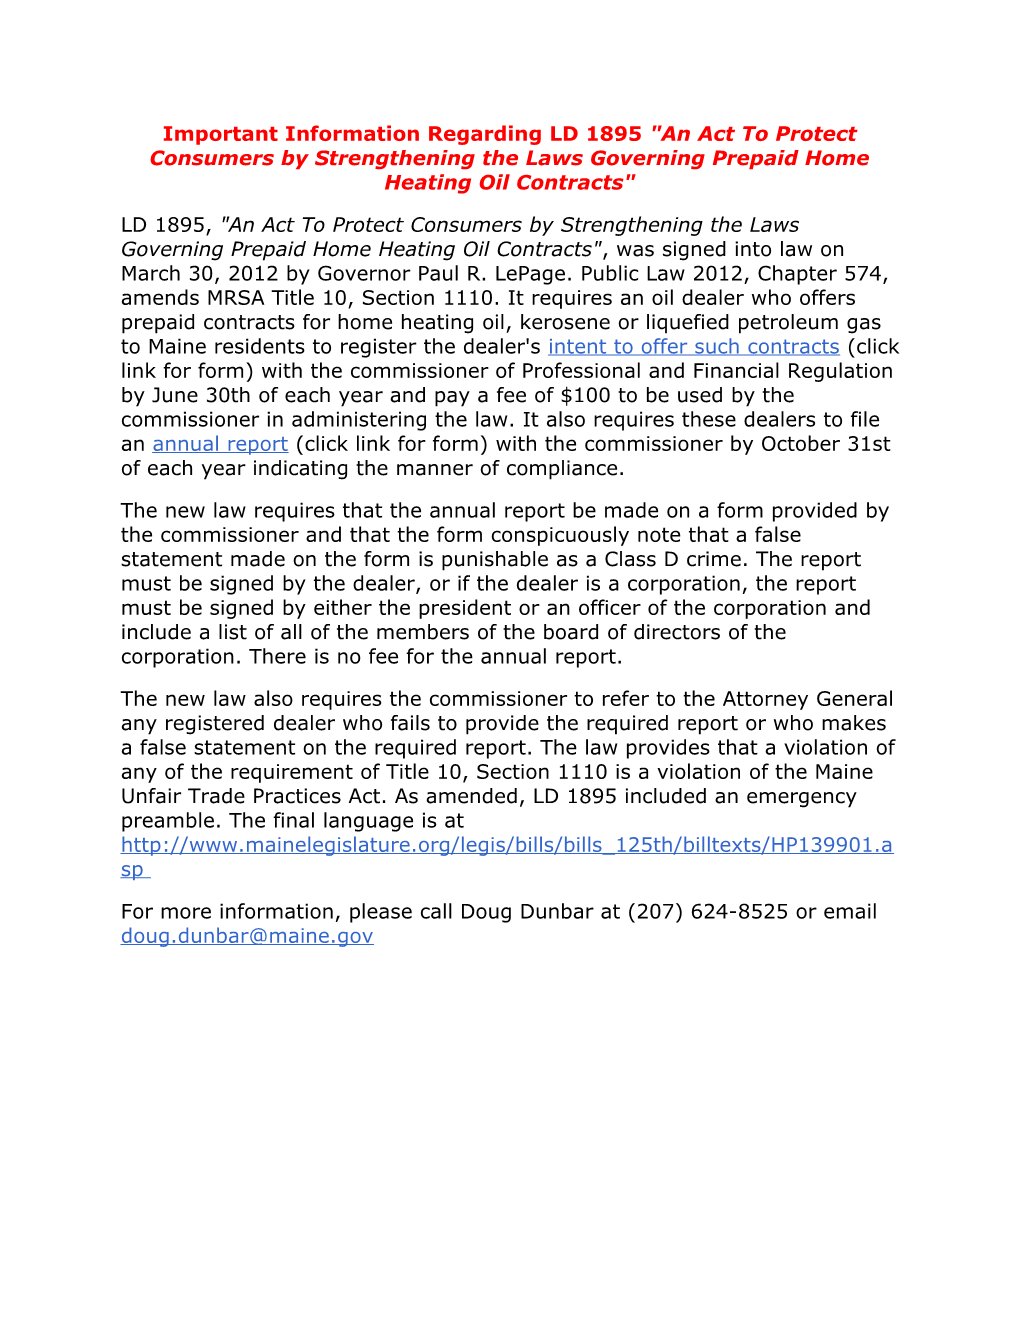 Important Information Regarding LD 1895 an Act to Protect Consumers by Strengthening The